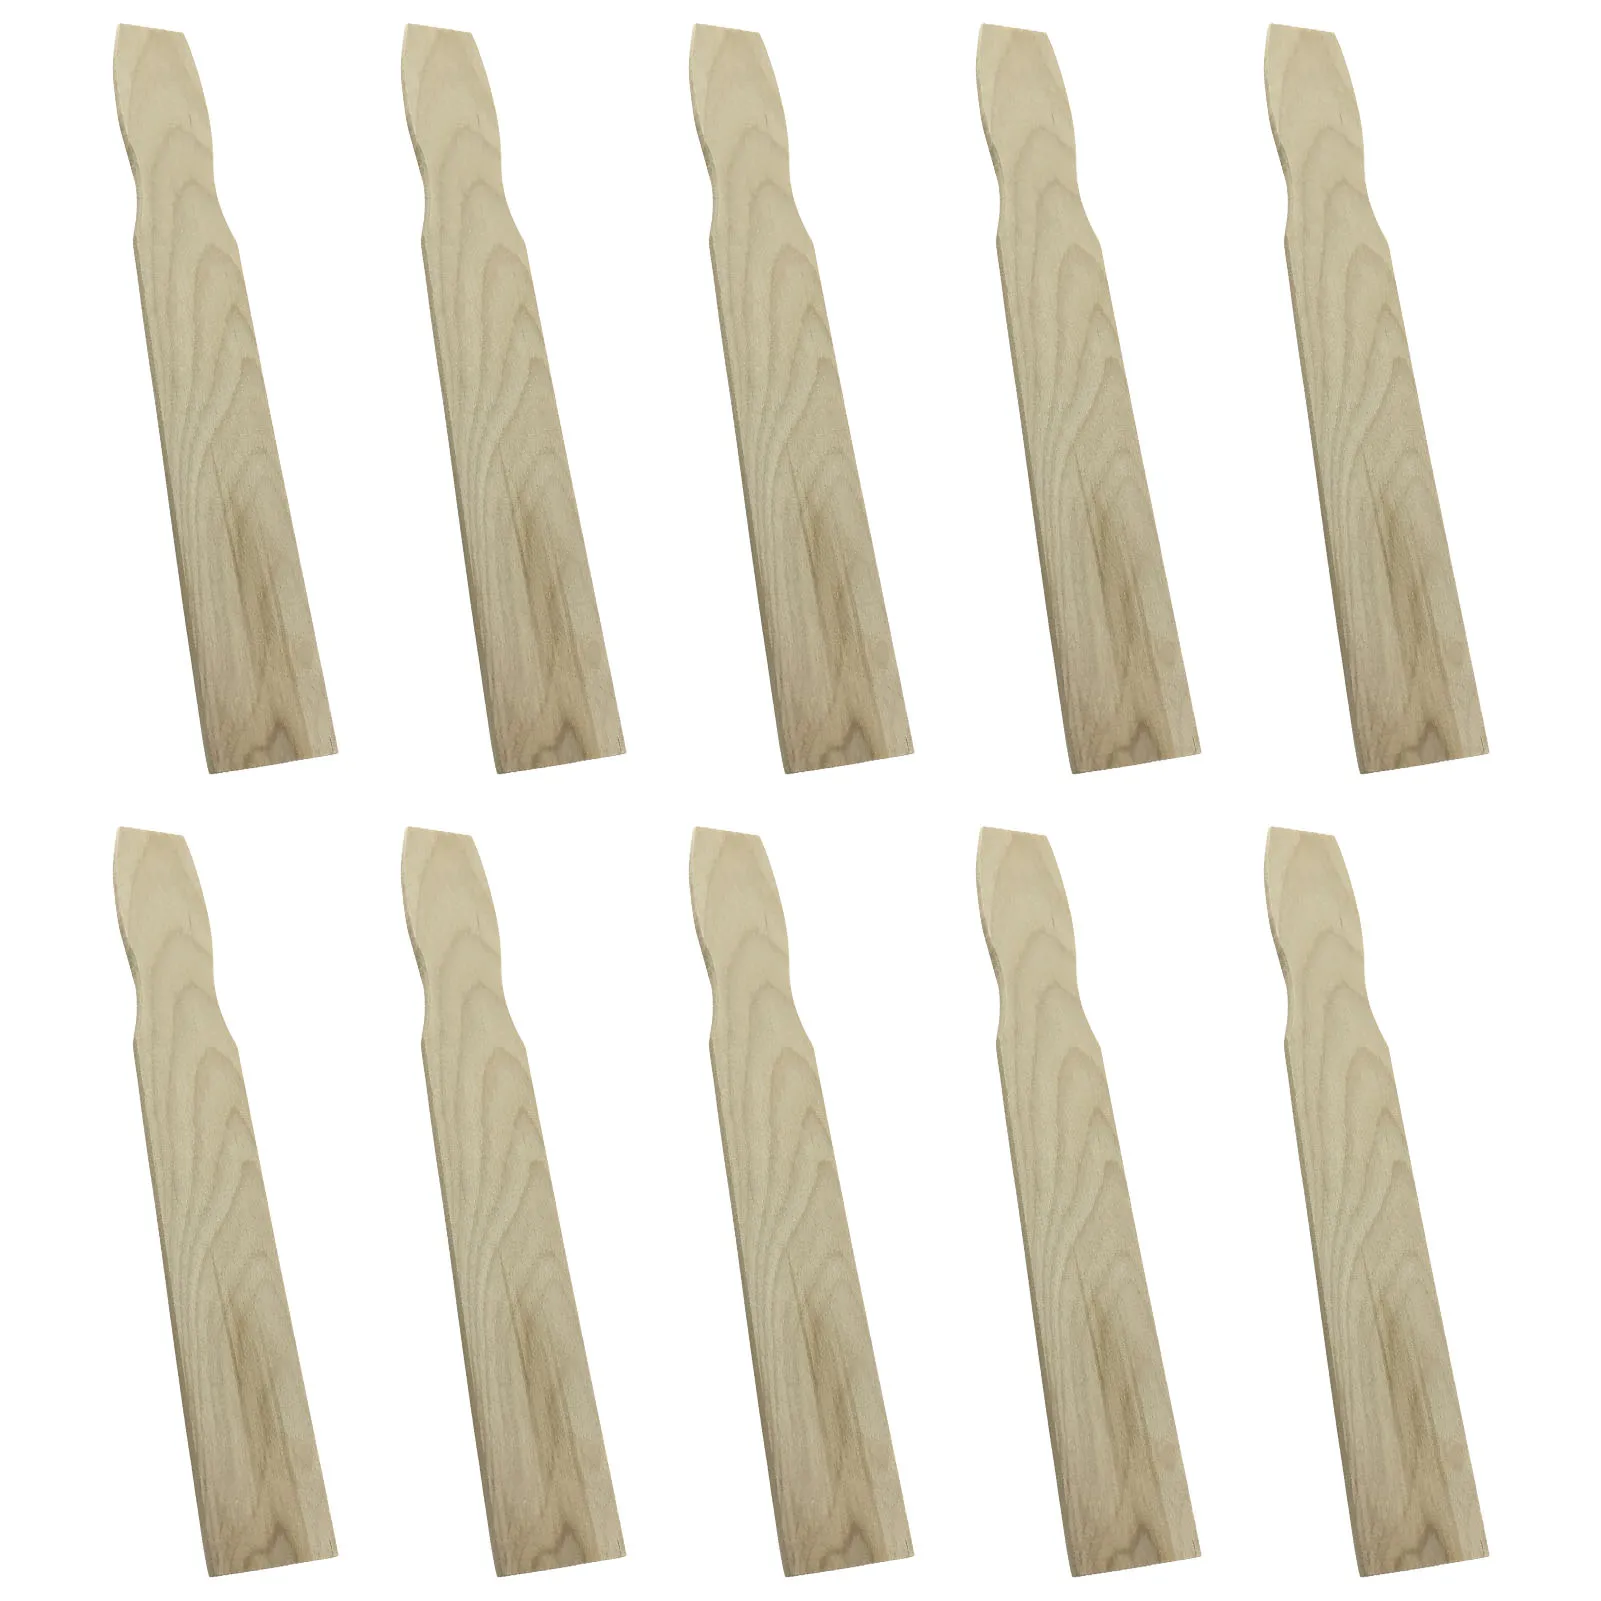 

10pcs Durable For Mixing Epoxy Garden Customers Project Paint Sticks Measuring Scale Silicone Hardwood Stirrers Sturdy Practical